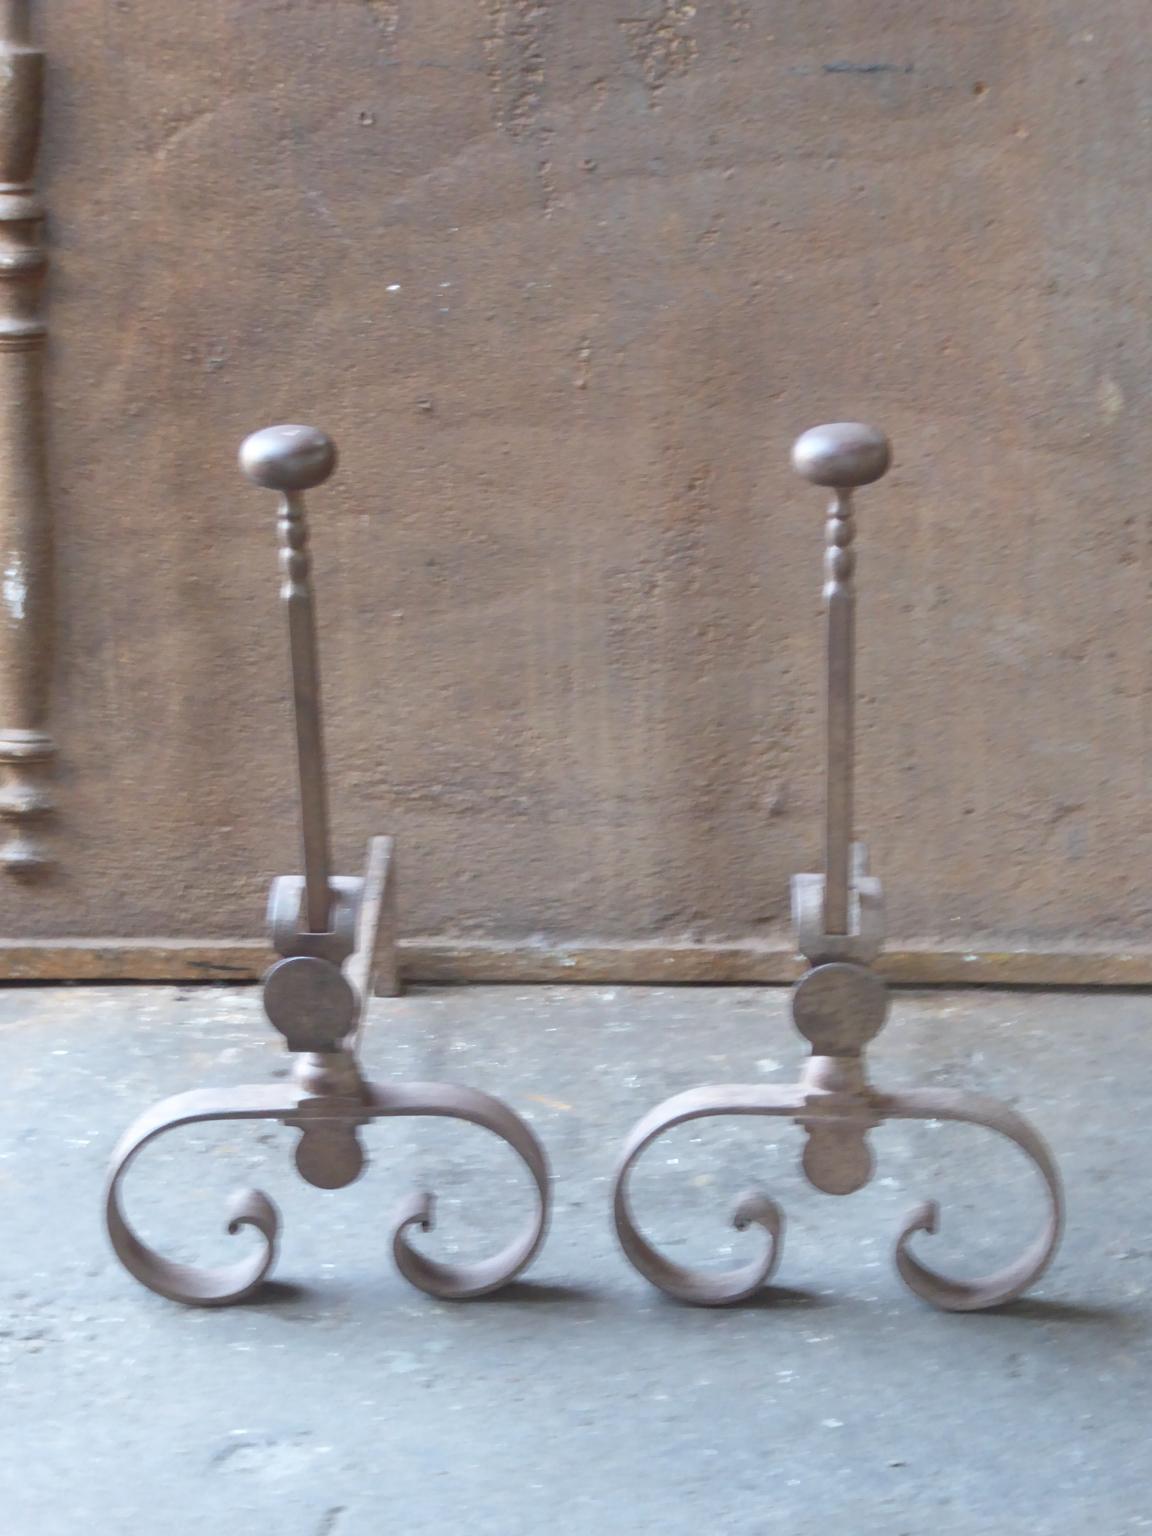 19th century French Napoleon III andirons made of wrought iron. The andirons are in a good condition.